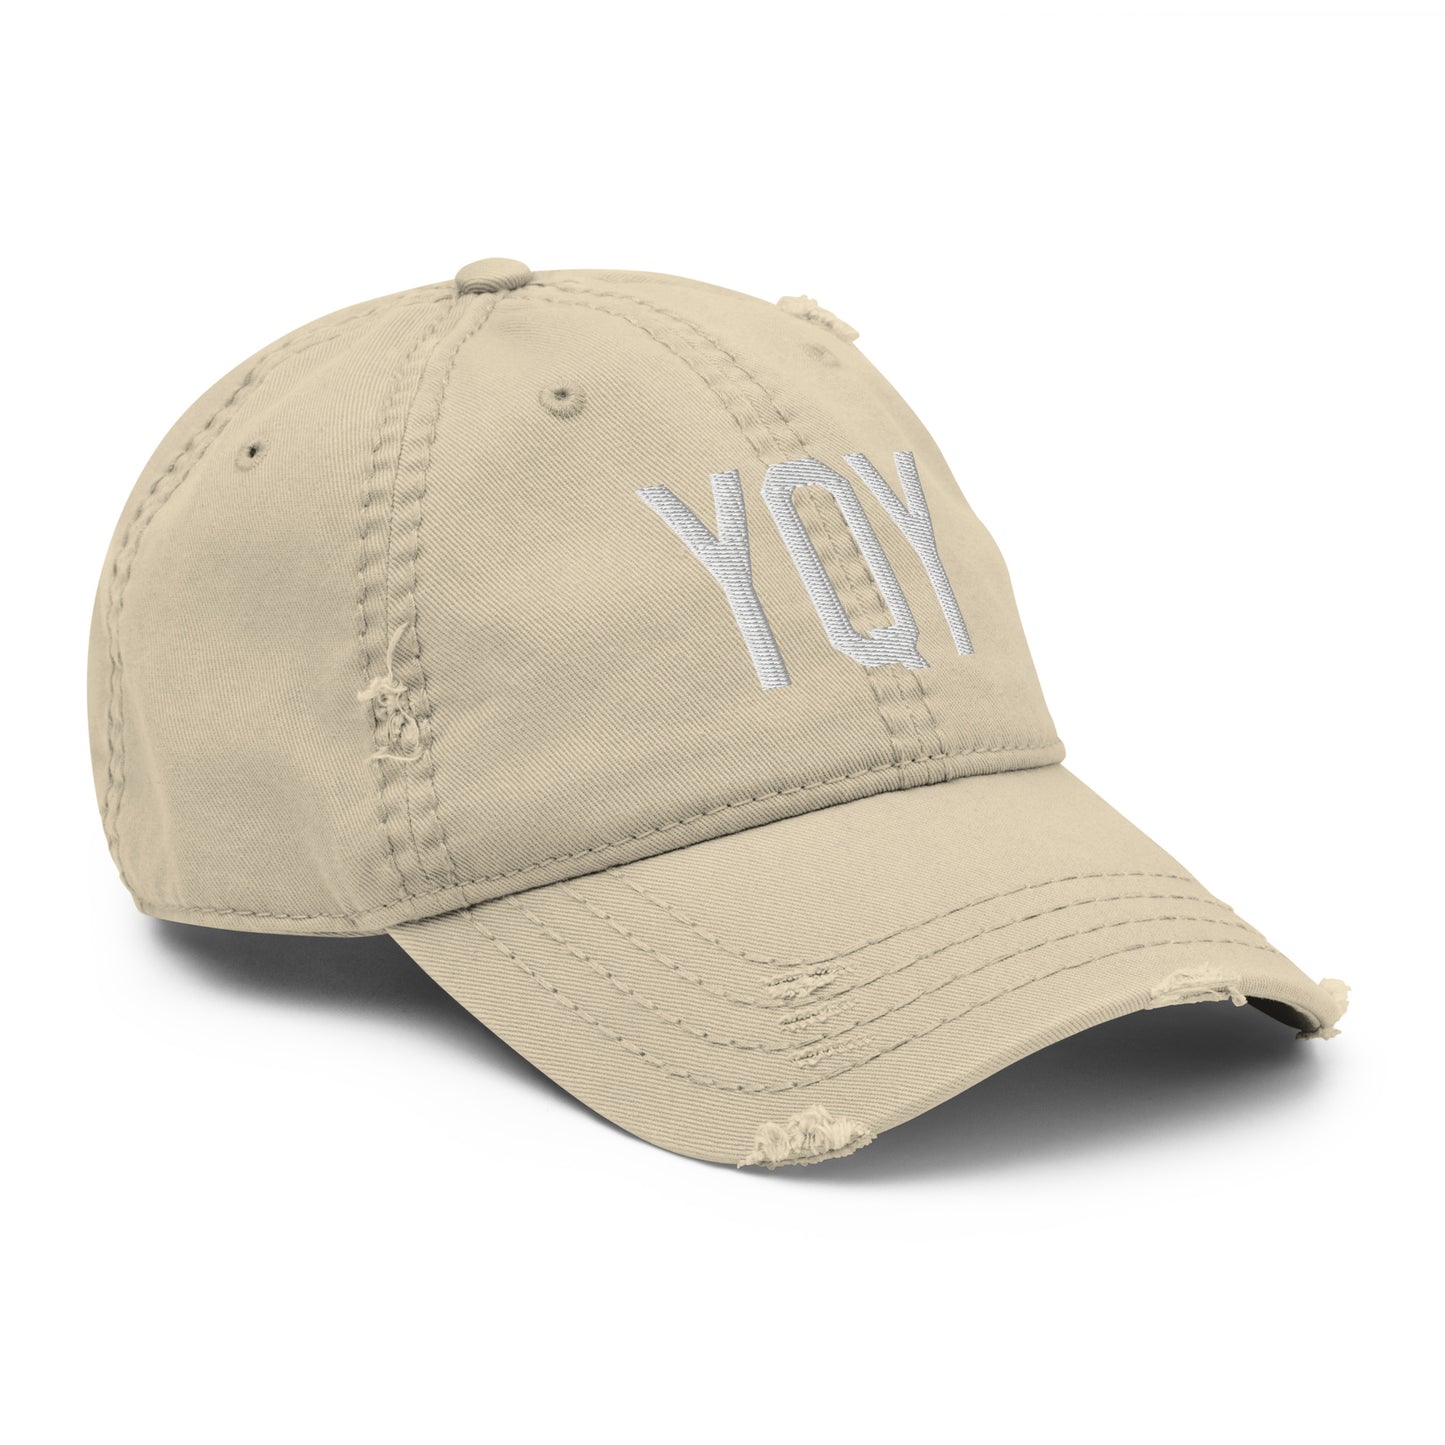 Airport Code Distressed Hat - White • YQY Sydney • YHM Designs - Image 20